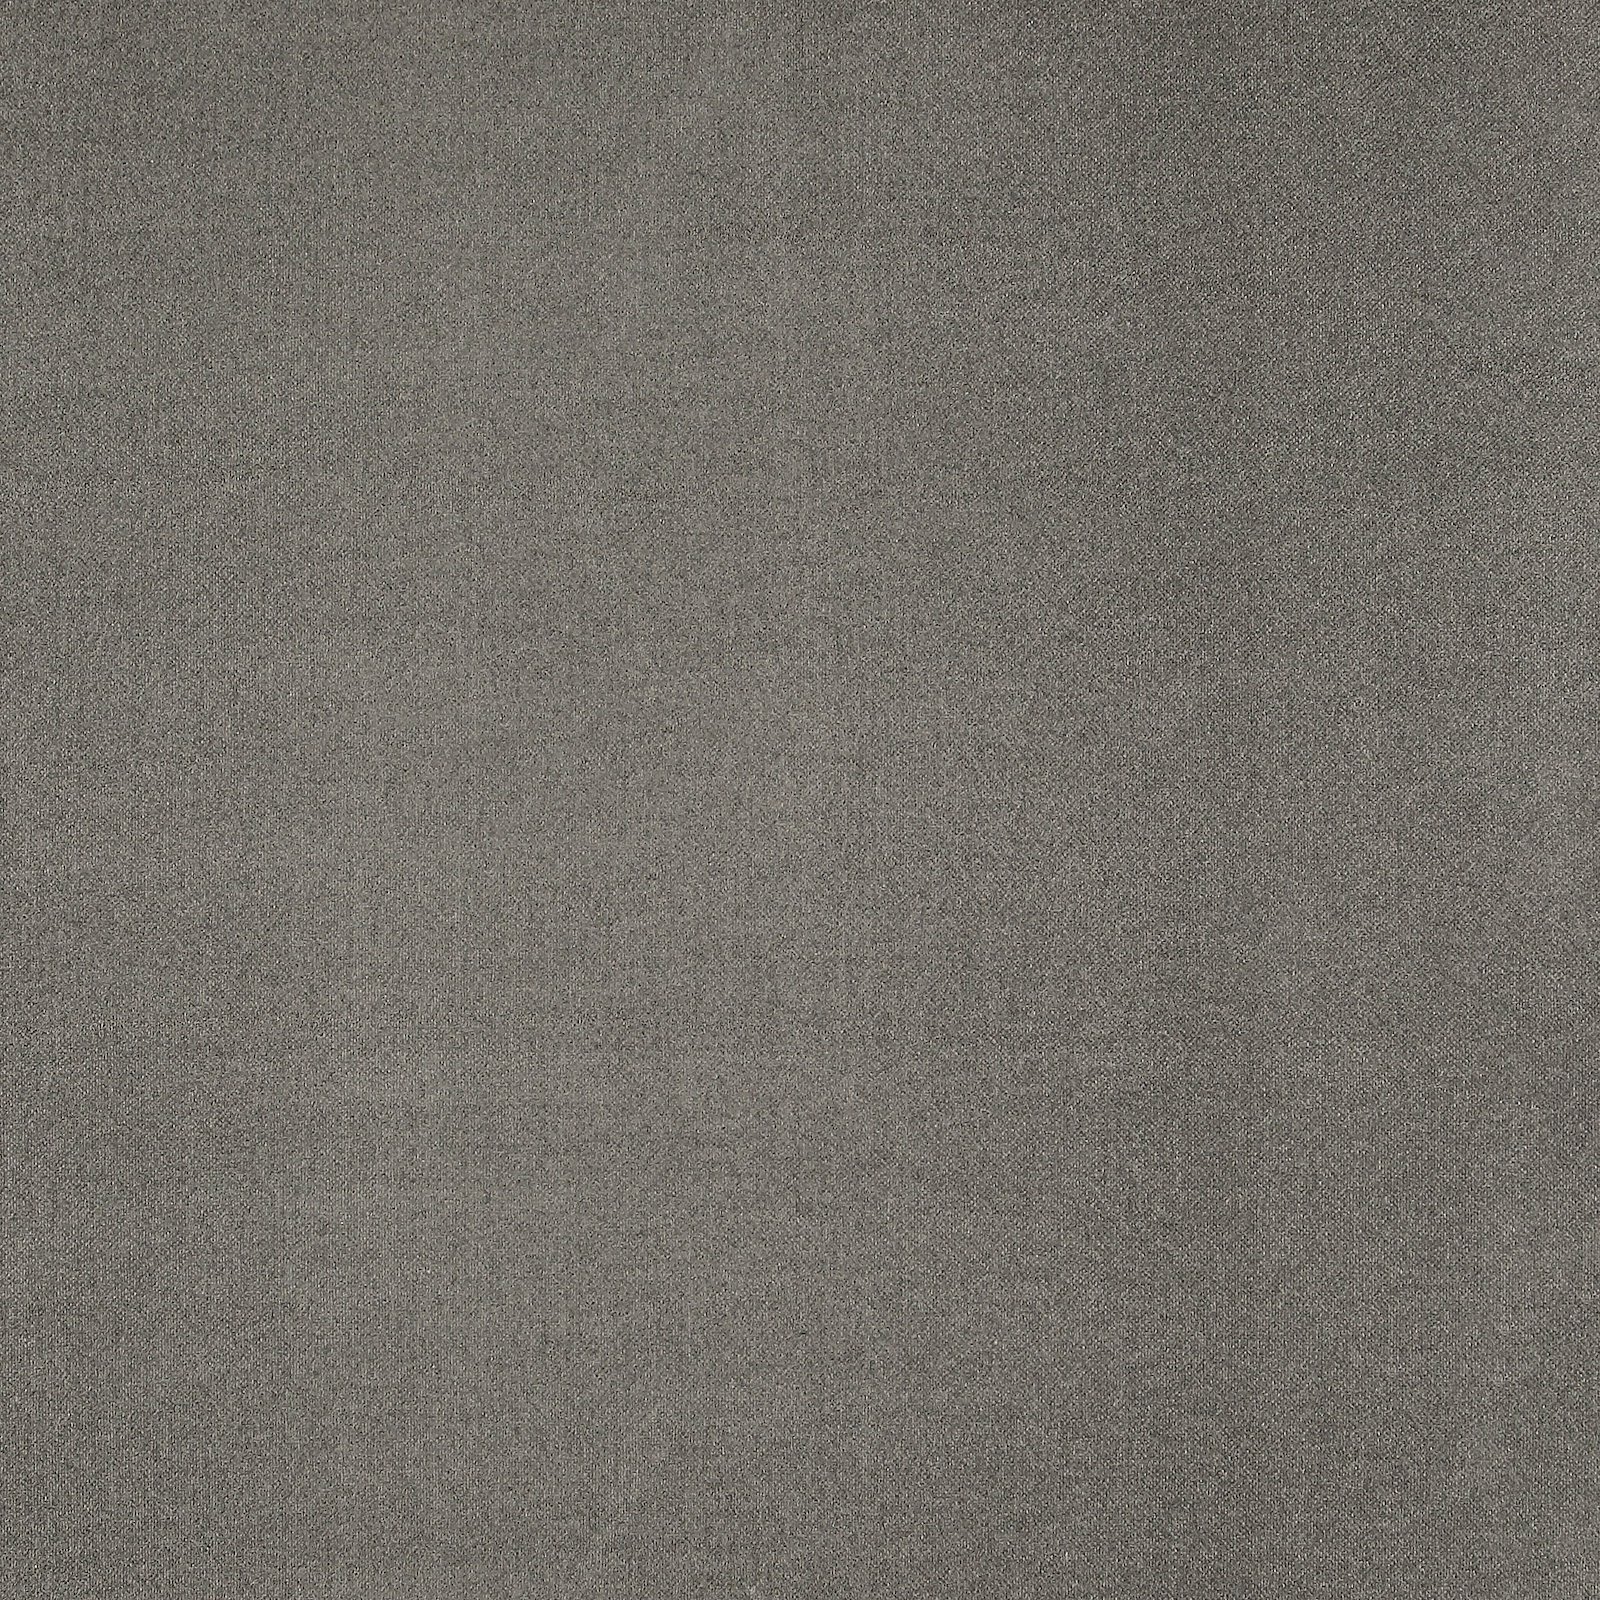 Upholstery fabric black/grey 822233_pack_solid